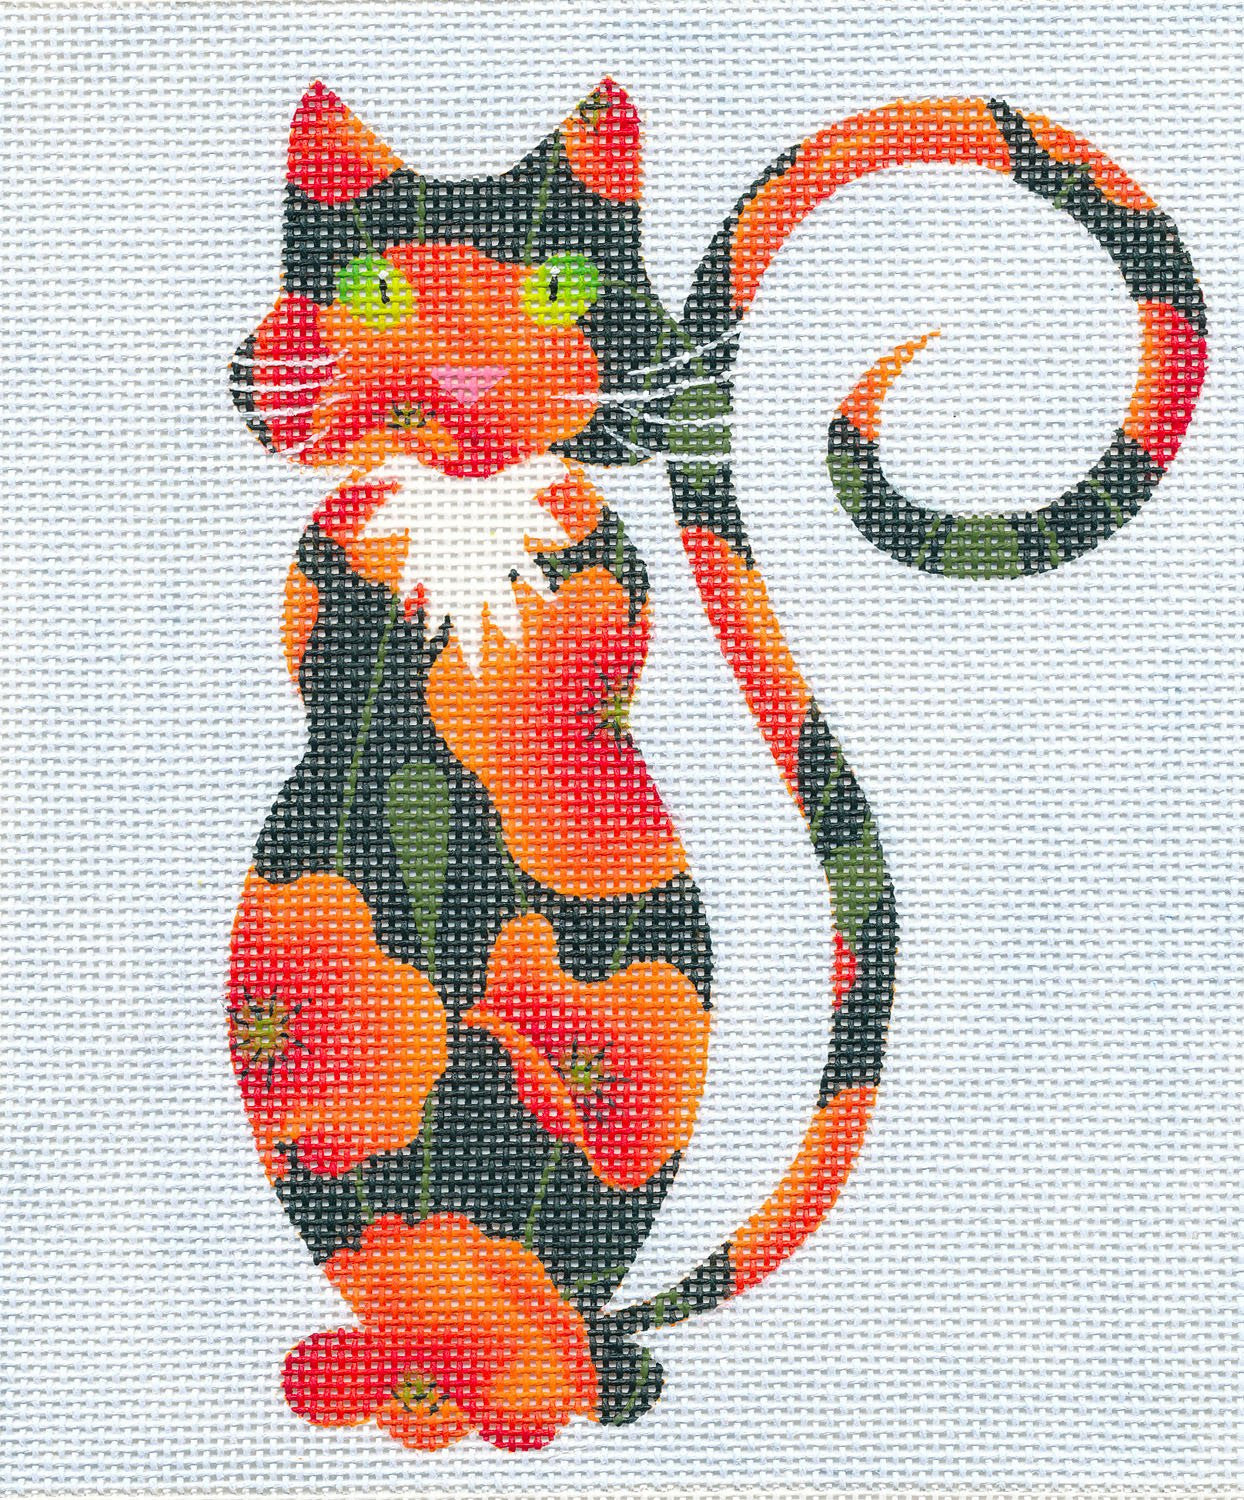 Cat canvas ~ Orange Poppy Cat handpainted Needlepoint Canvas Insert or Ornament by LEE